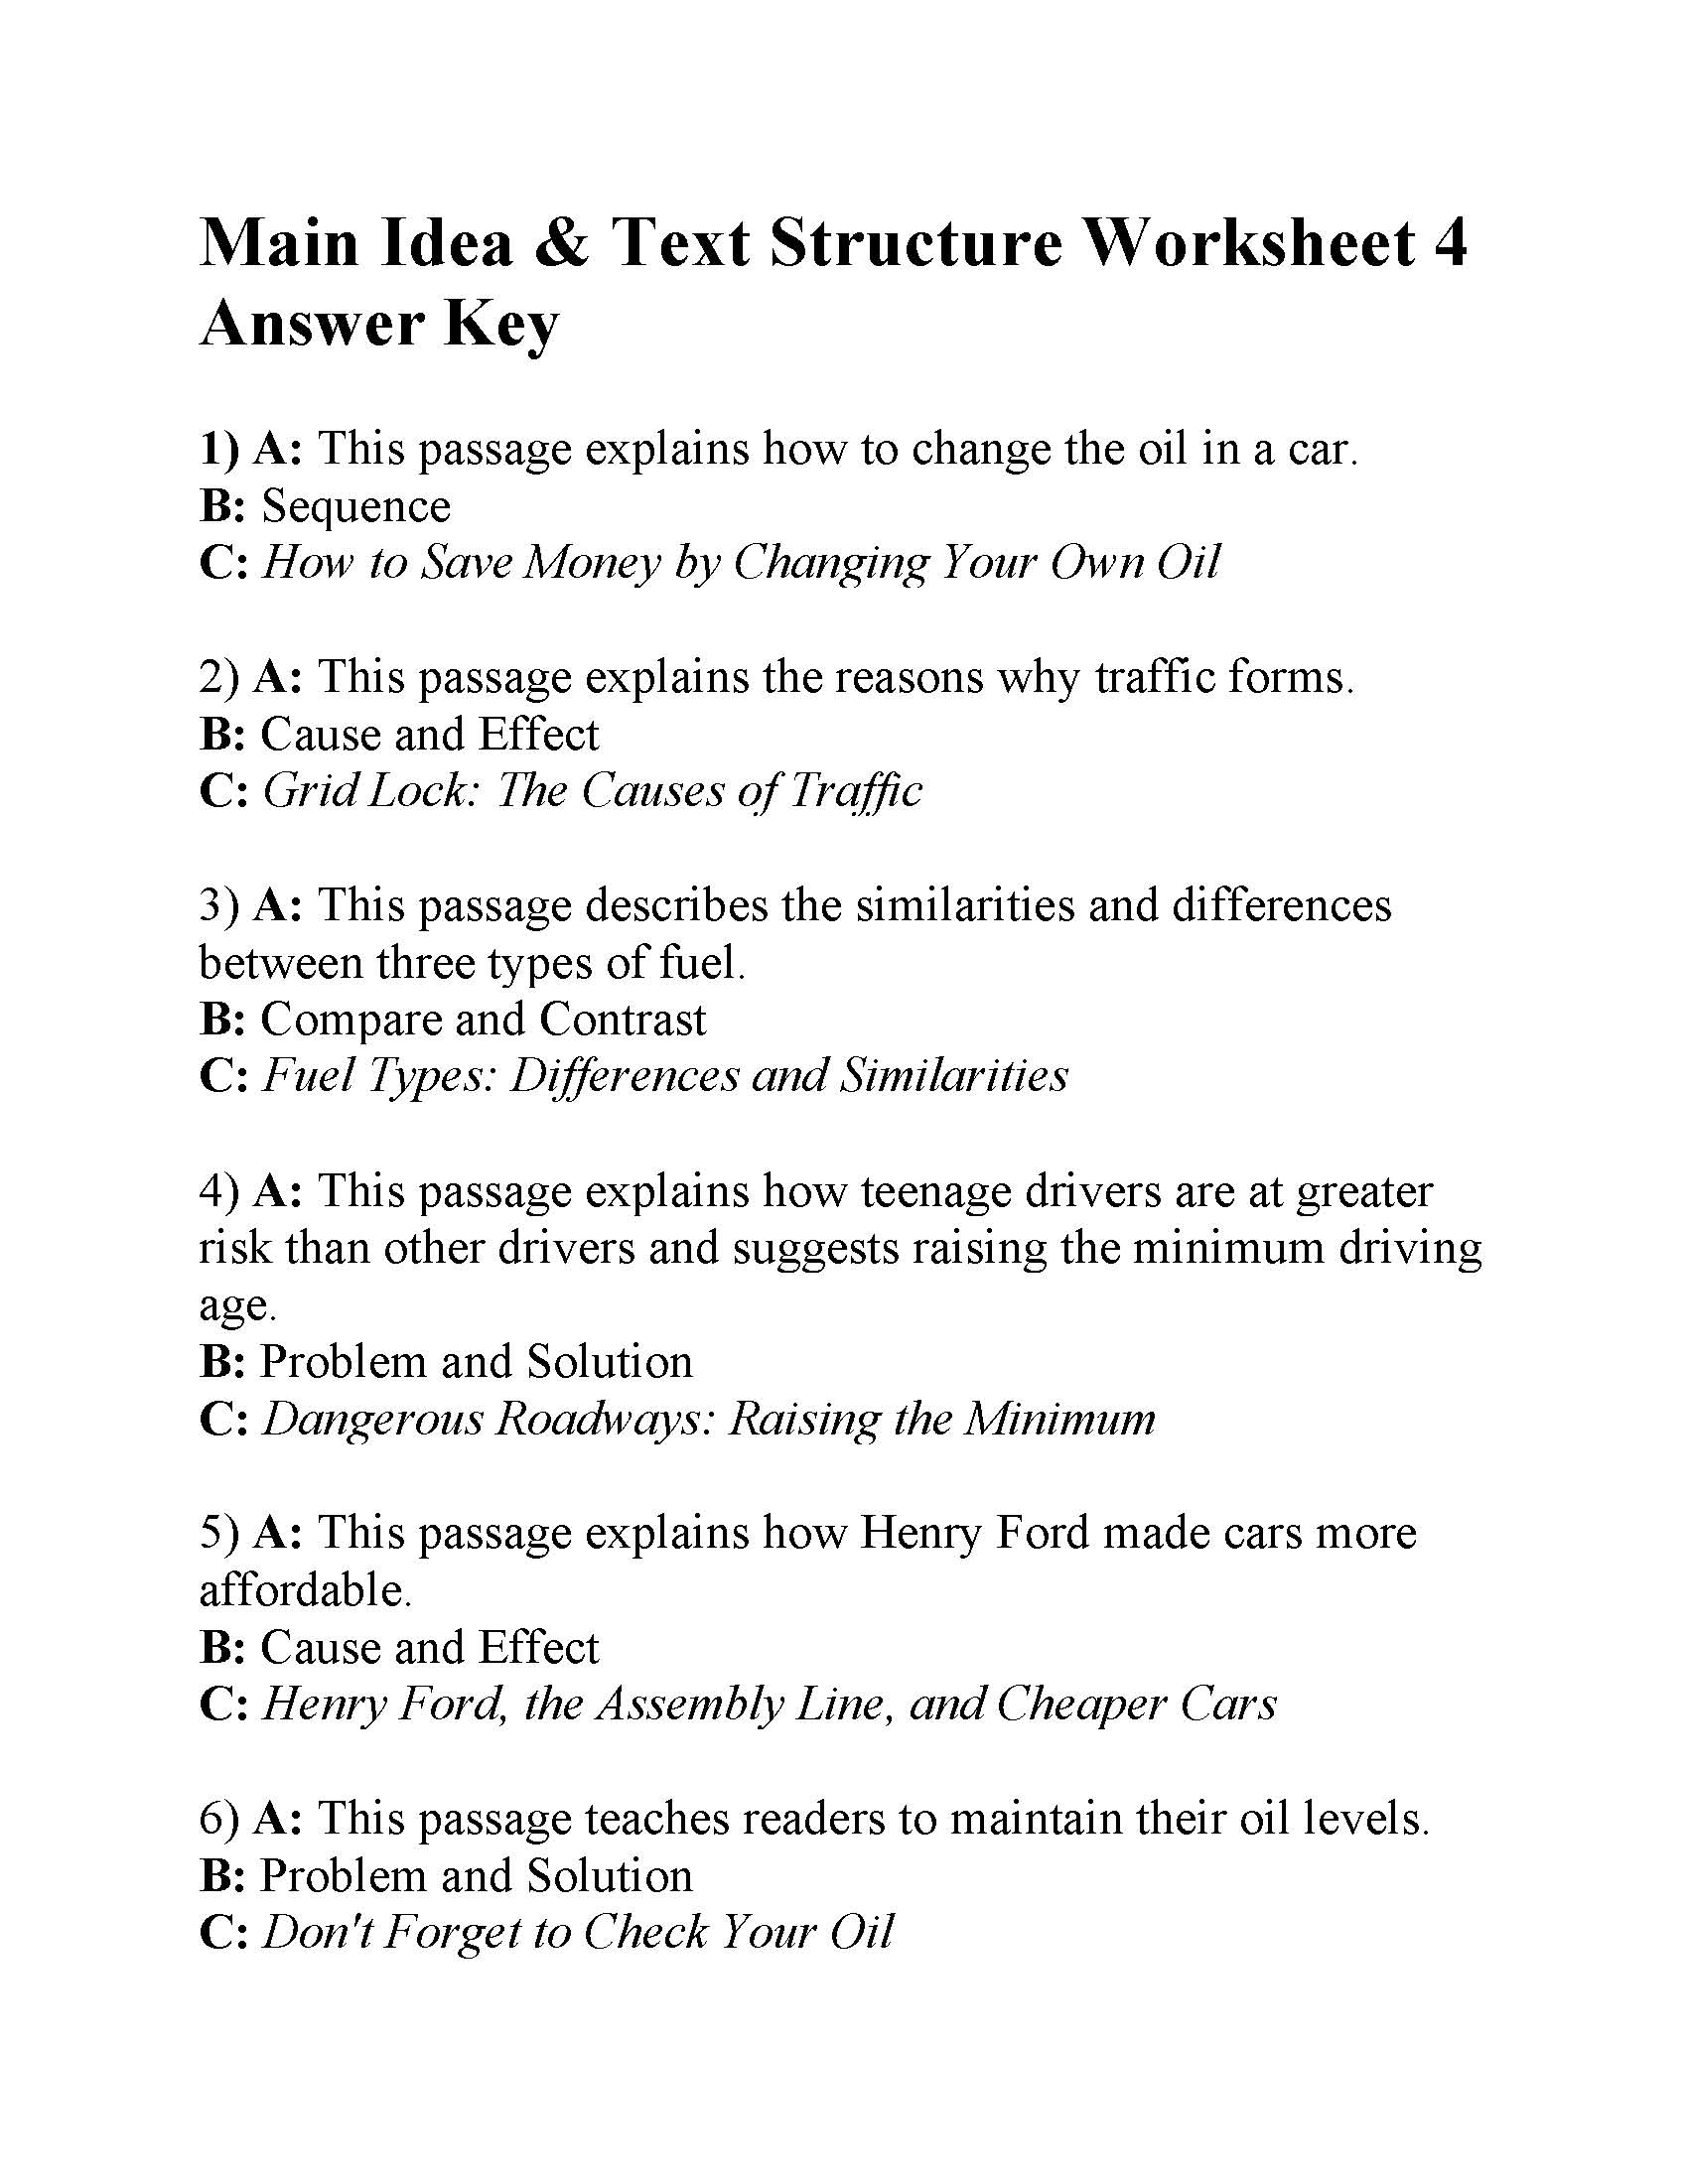 This is the answer key for the Main Idea and Text Structure Worksheet 4.